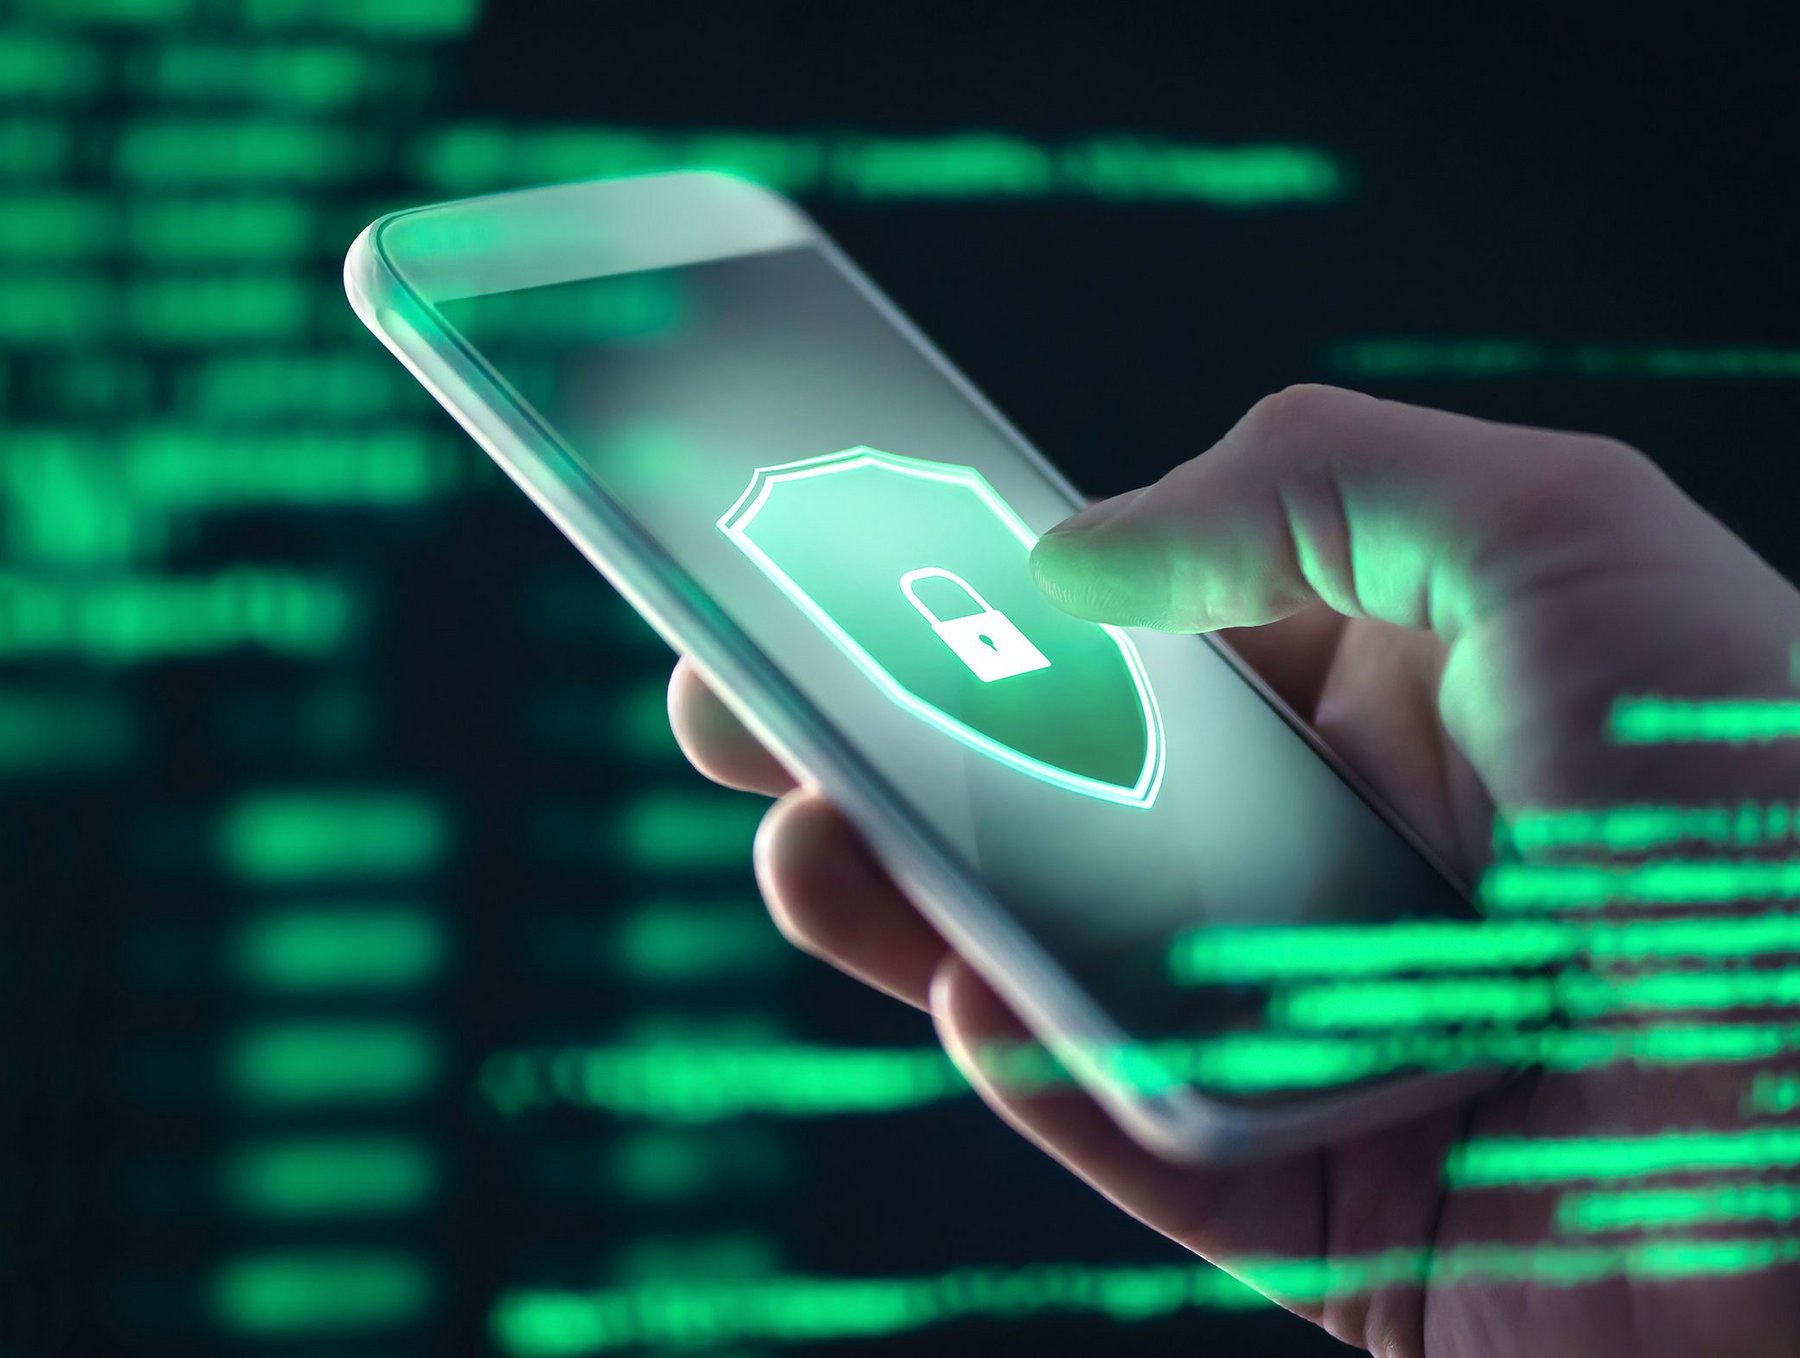 How To Use Appdome's No-code mobile app security for Whil 